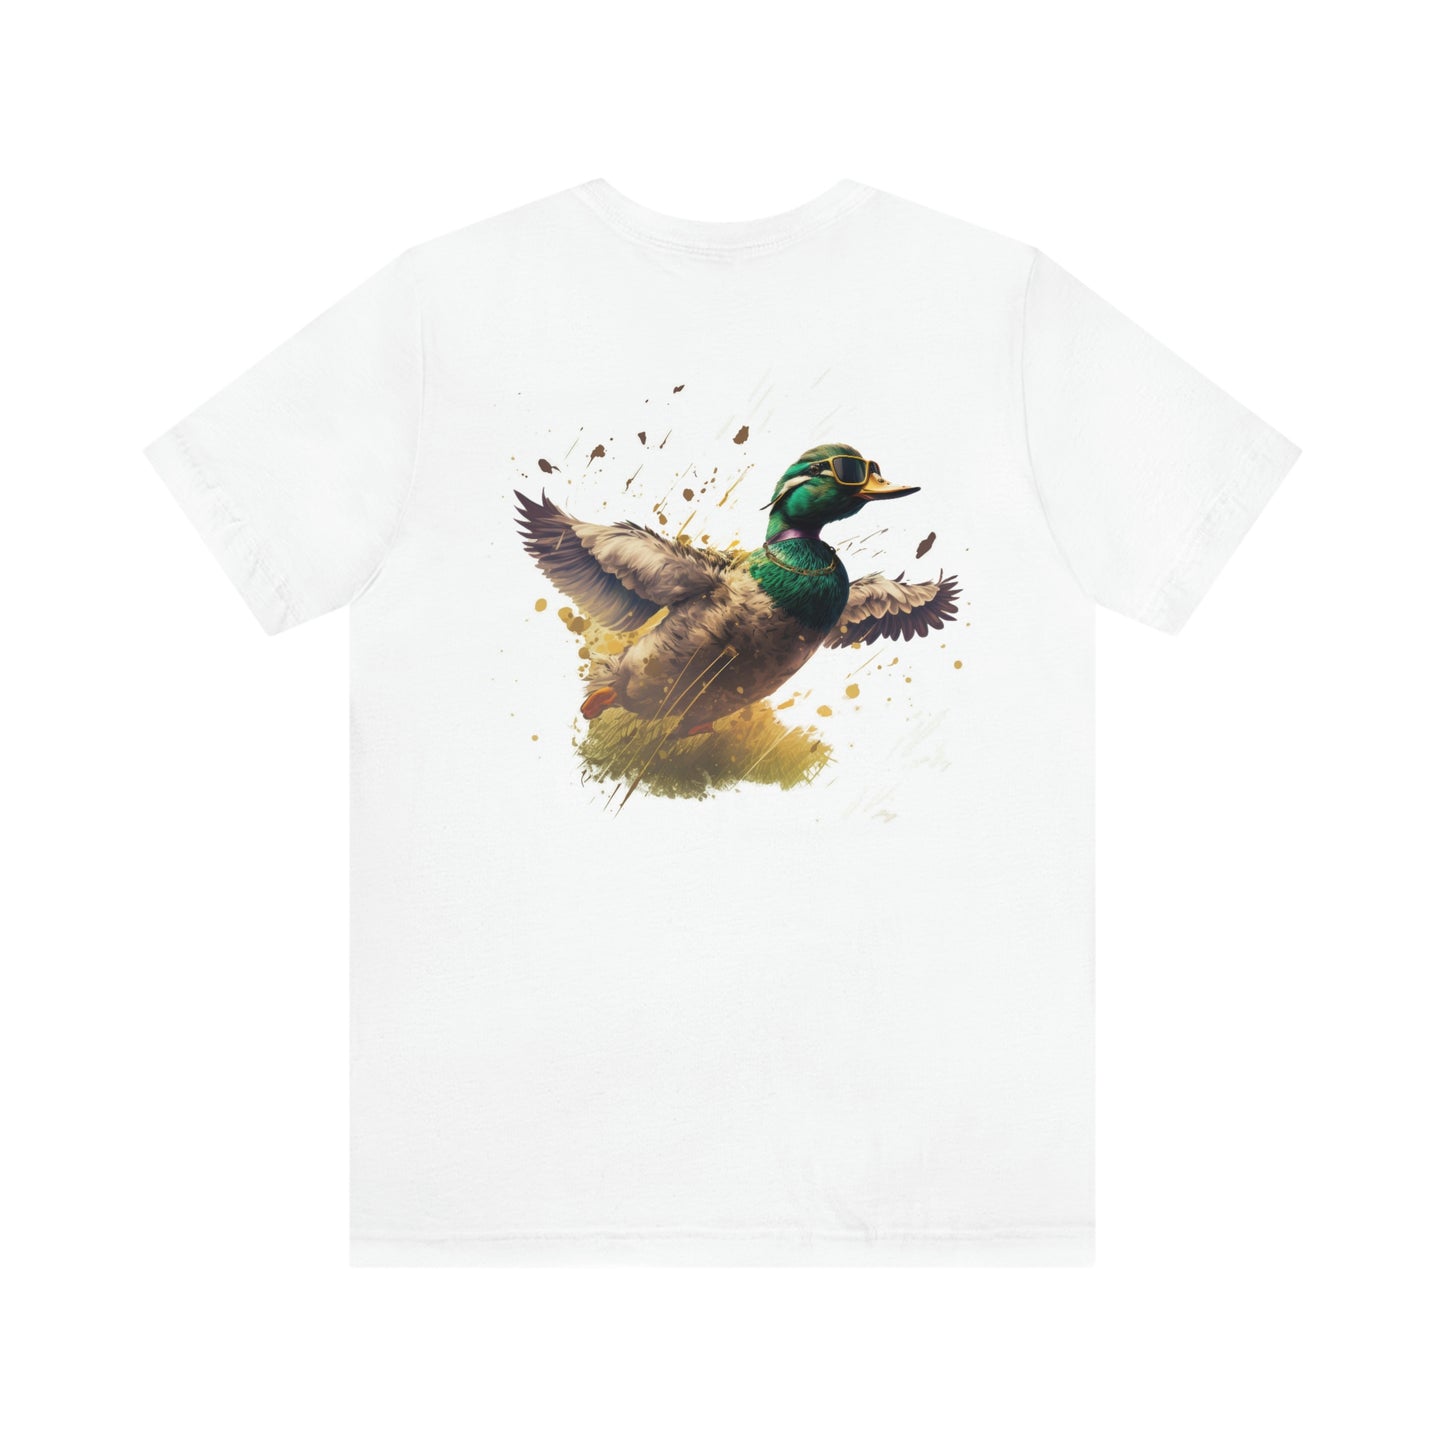 Fly High T-Shirt (3 Colors Available)